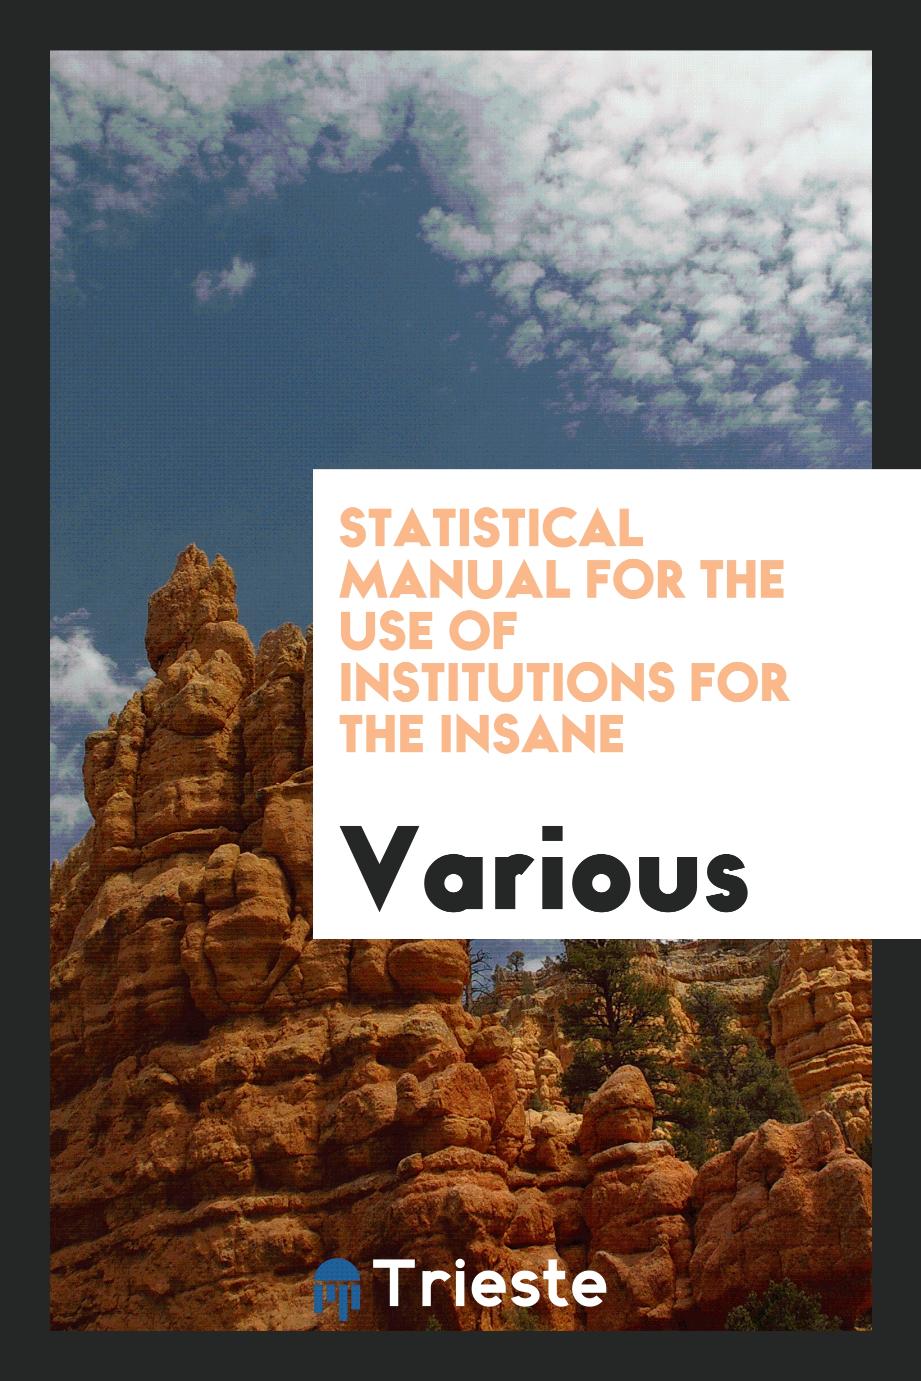 Statistical manual for the use of institutions for the insane